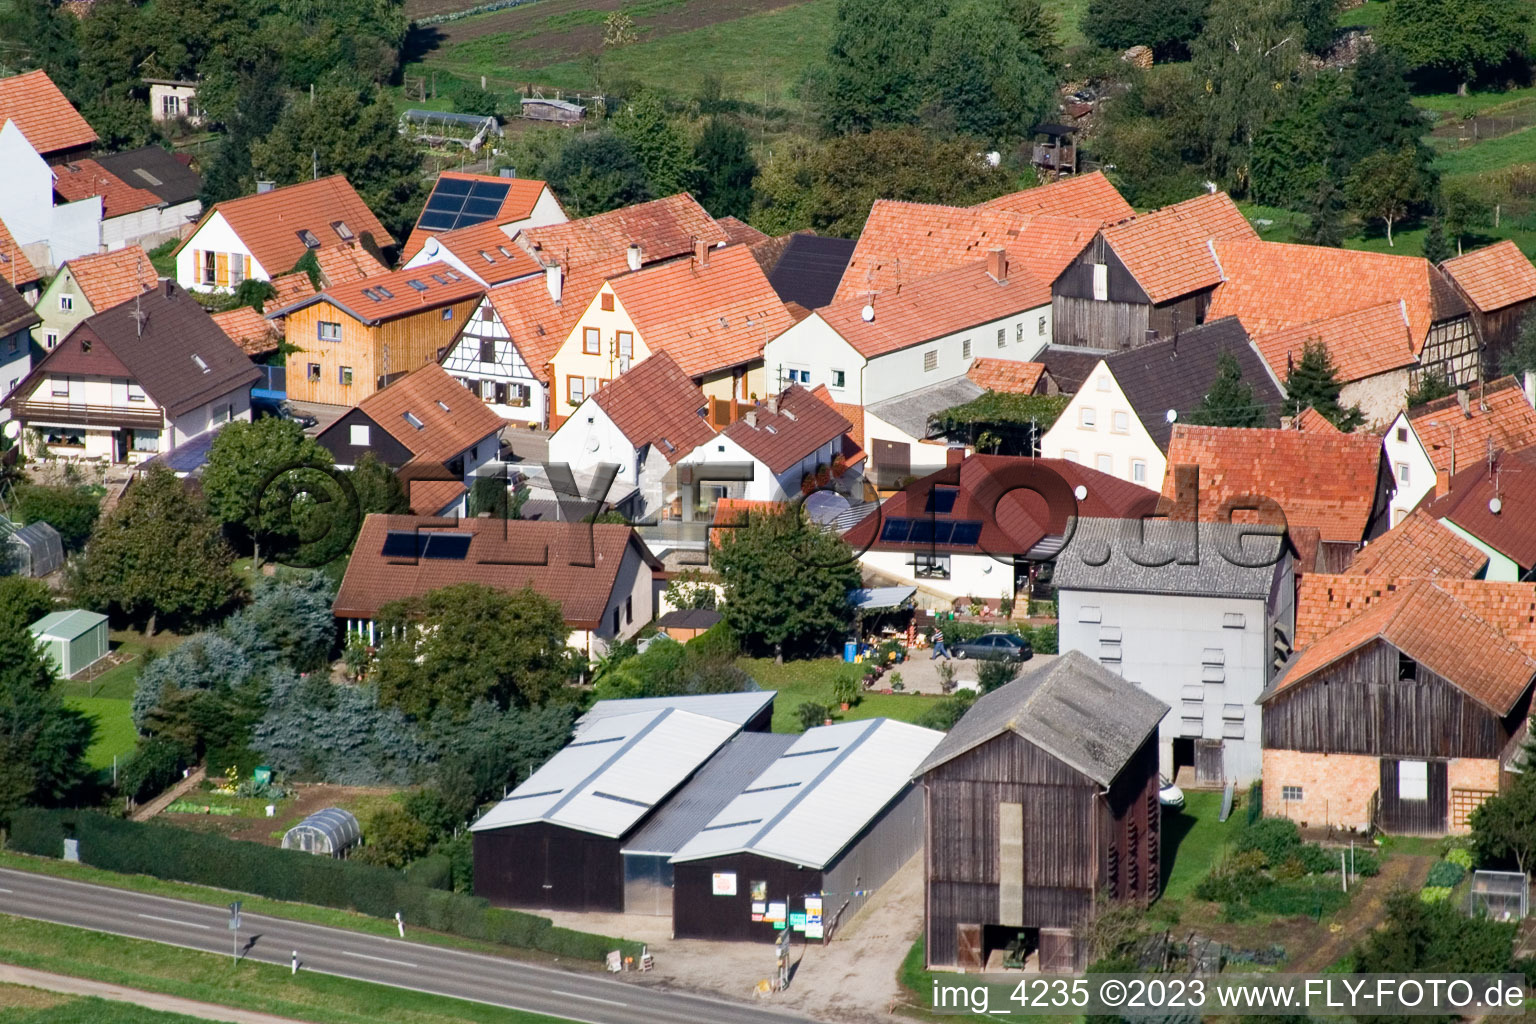 Aerial photograpy of Brehmstr in the district Minderslachen in Kandel in the state Rhineland-Palatinate, Germany